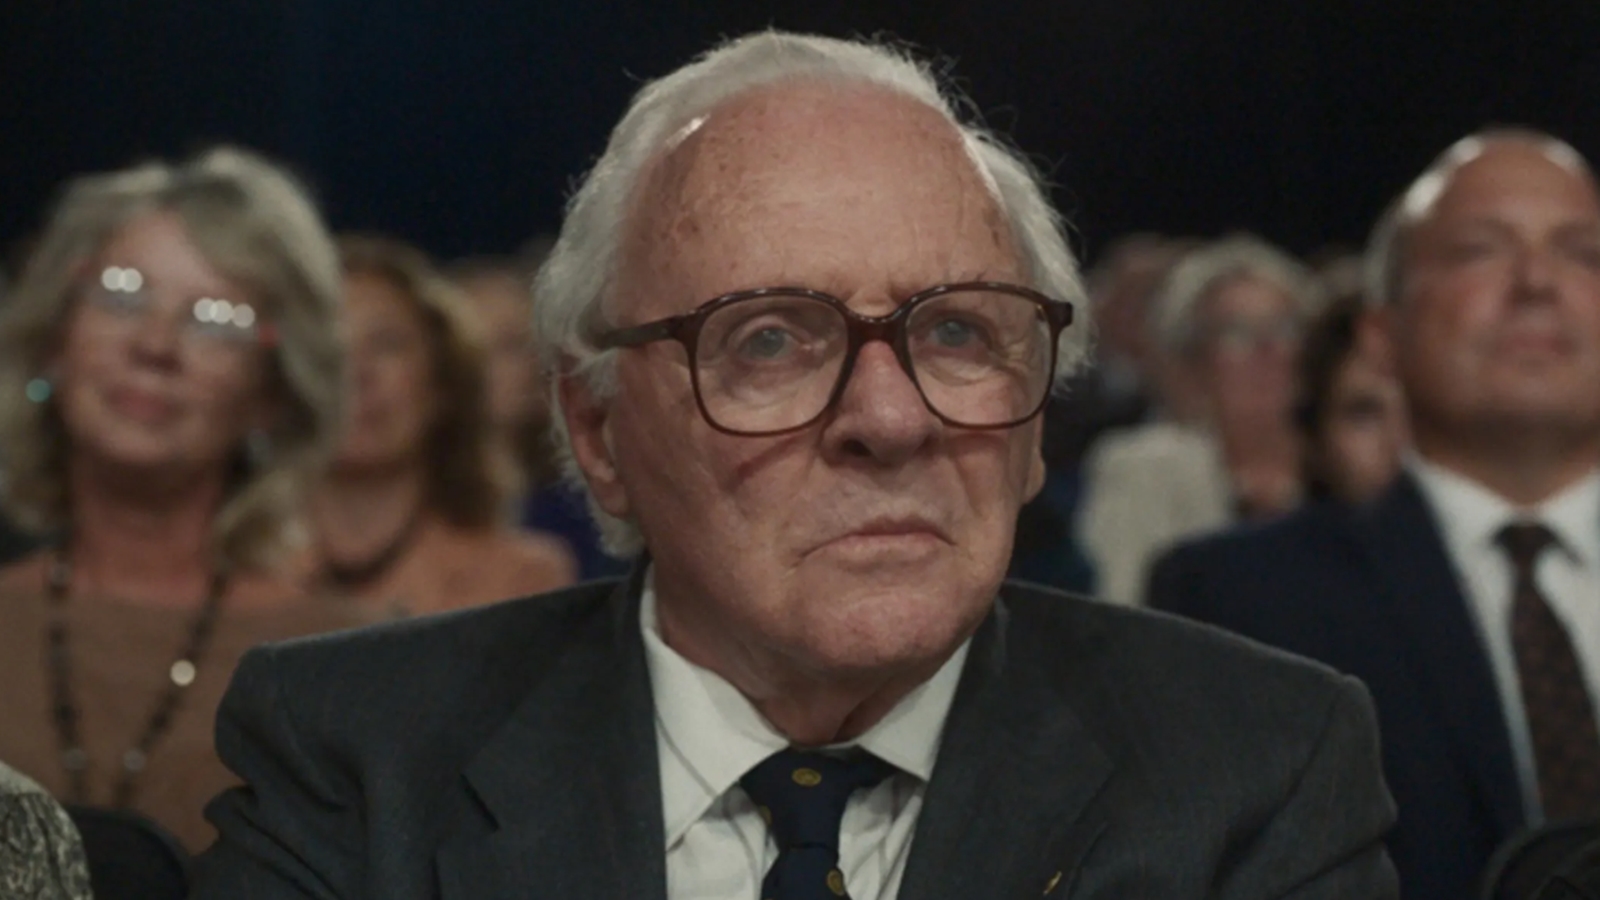 android, one life movie review: anthony hopkins is deeply moving as ‘british schindler’